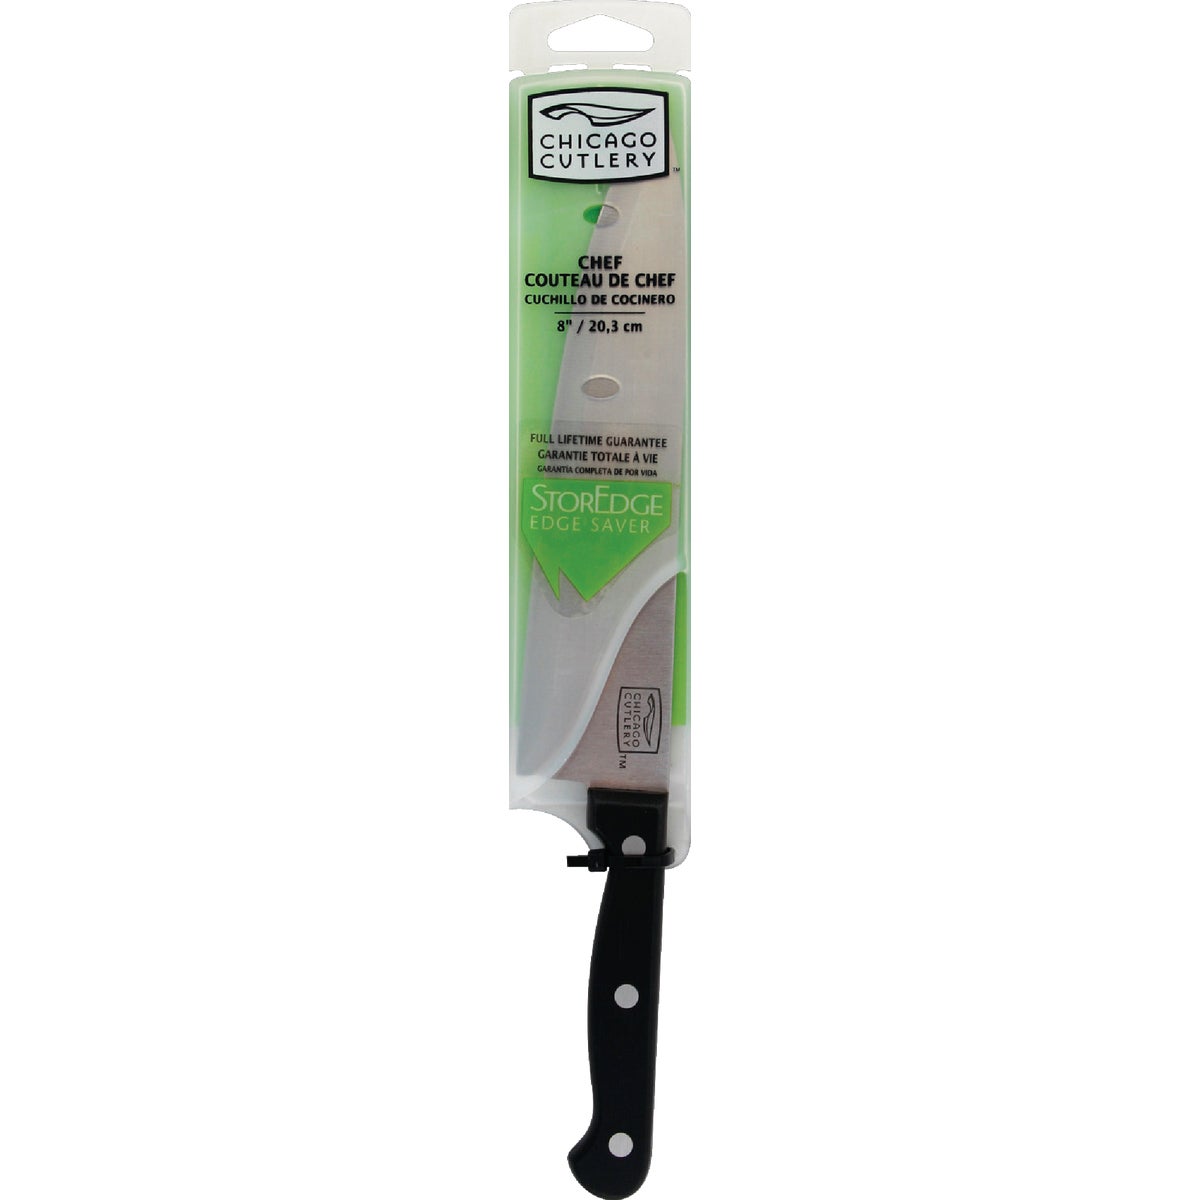 Item 624330, The 8" Essentials chef knife is used to dice onions, mince parsley, core a 